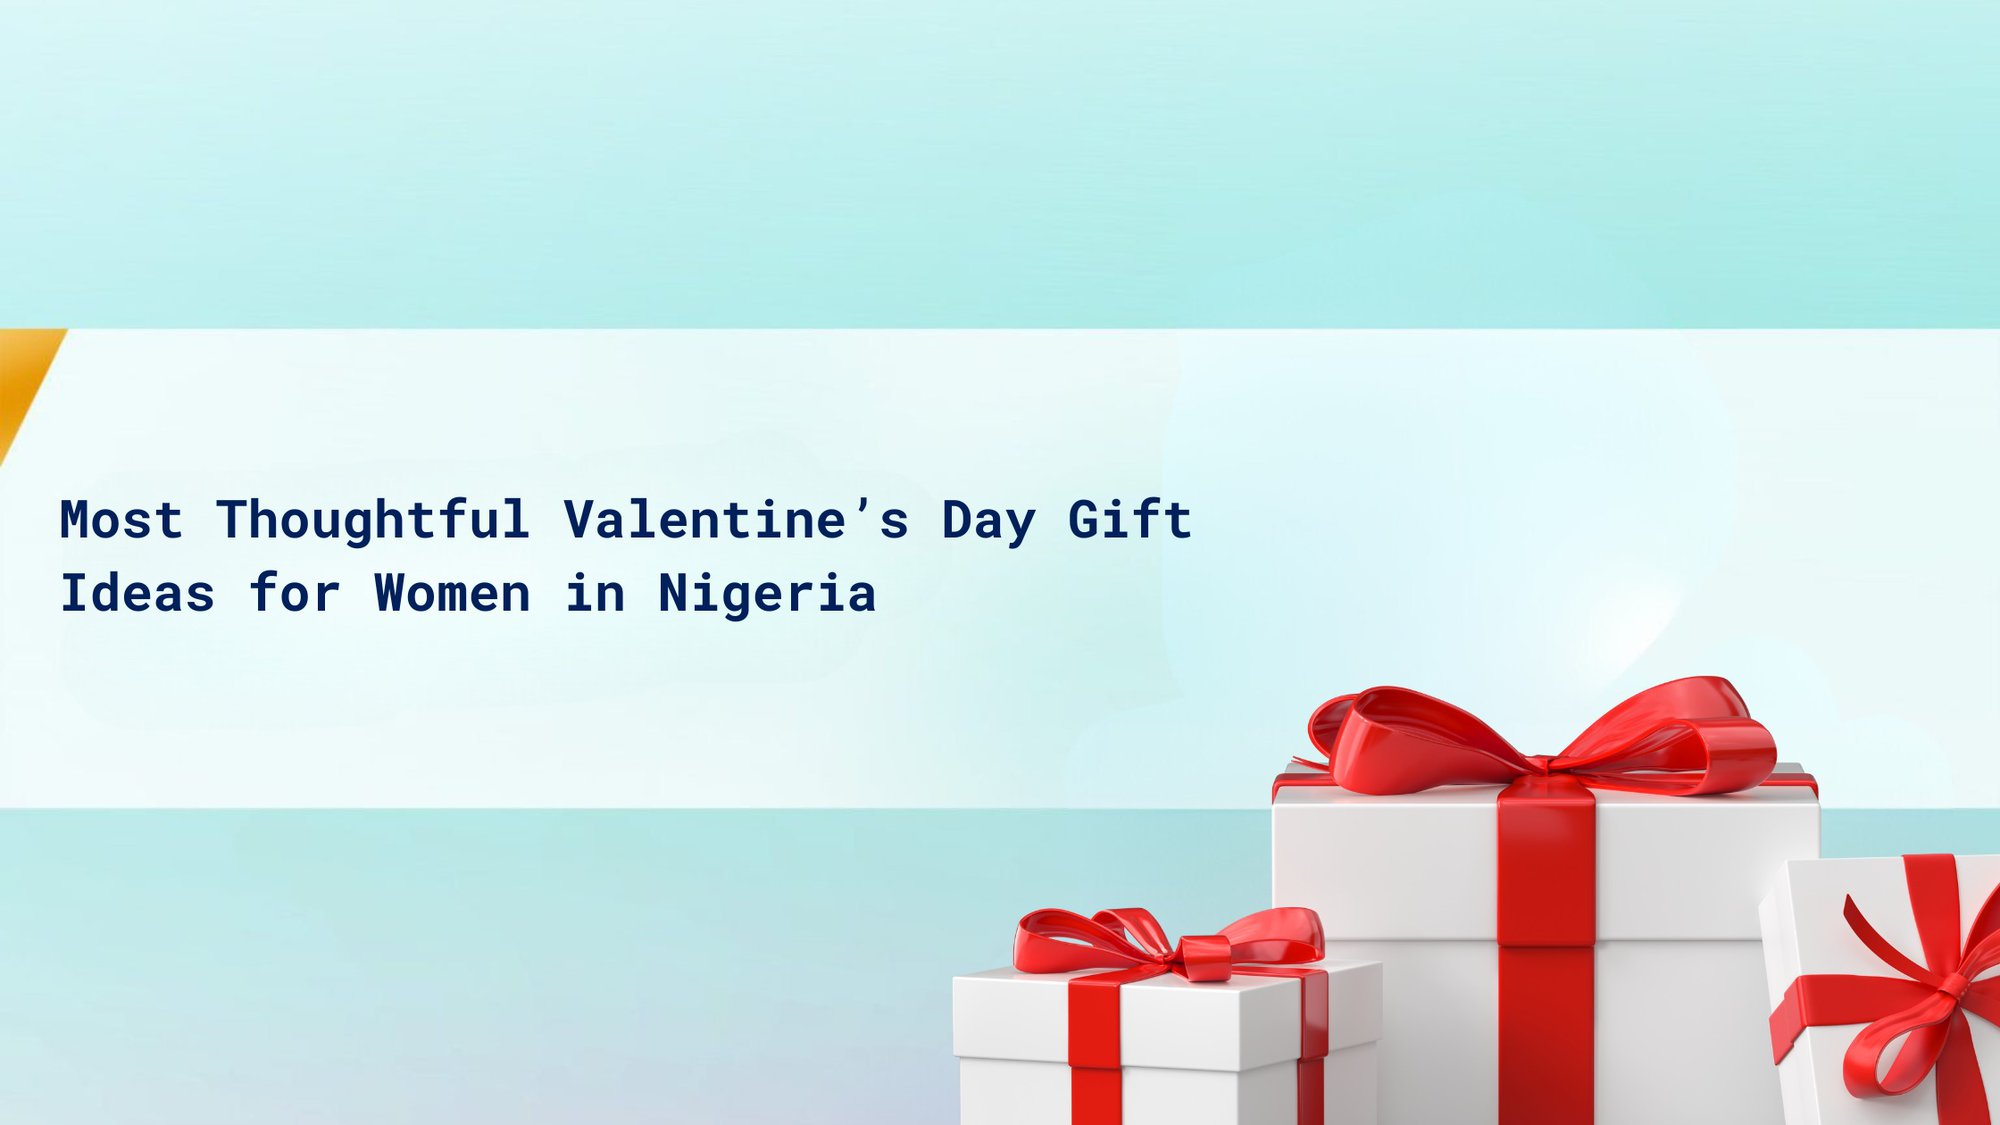 Most Thoughtful Valentine’s Day Gift Ideas for Women in Nigeria cover